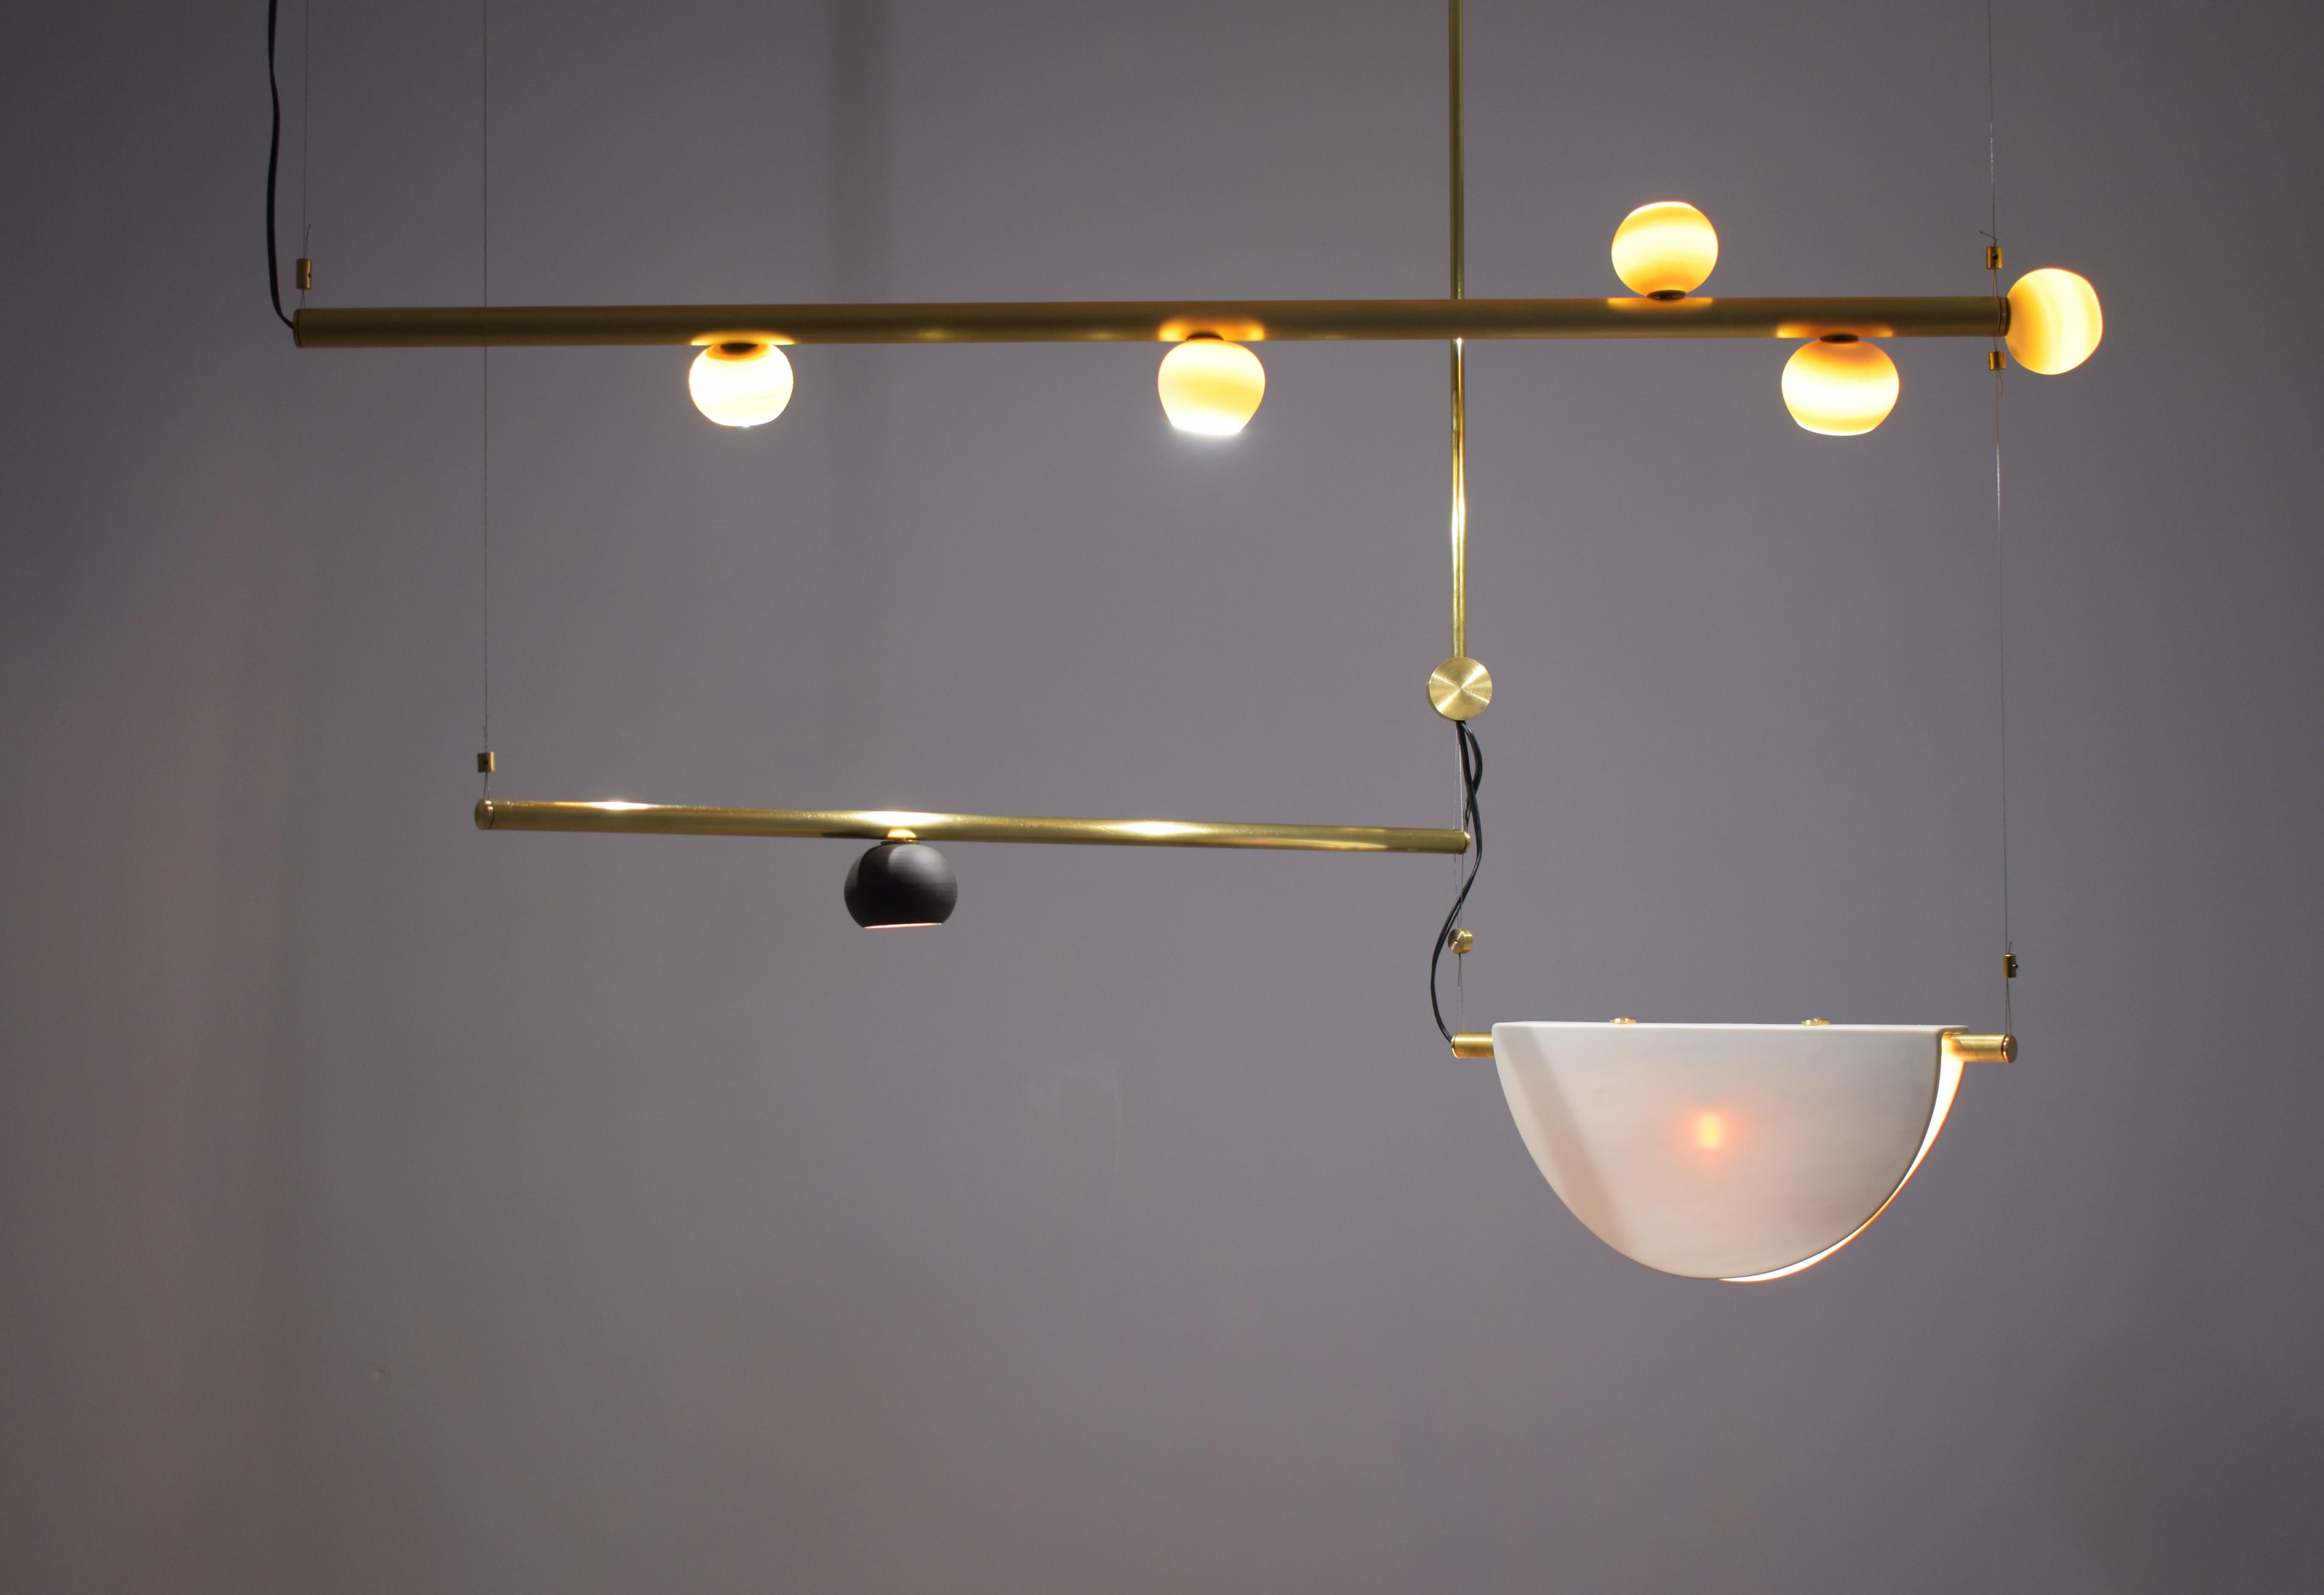 Modern Brass Sculpted Light Suspension, My Queen III, Signed Periclis Frementitis